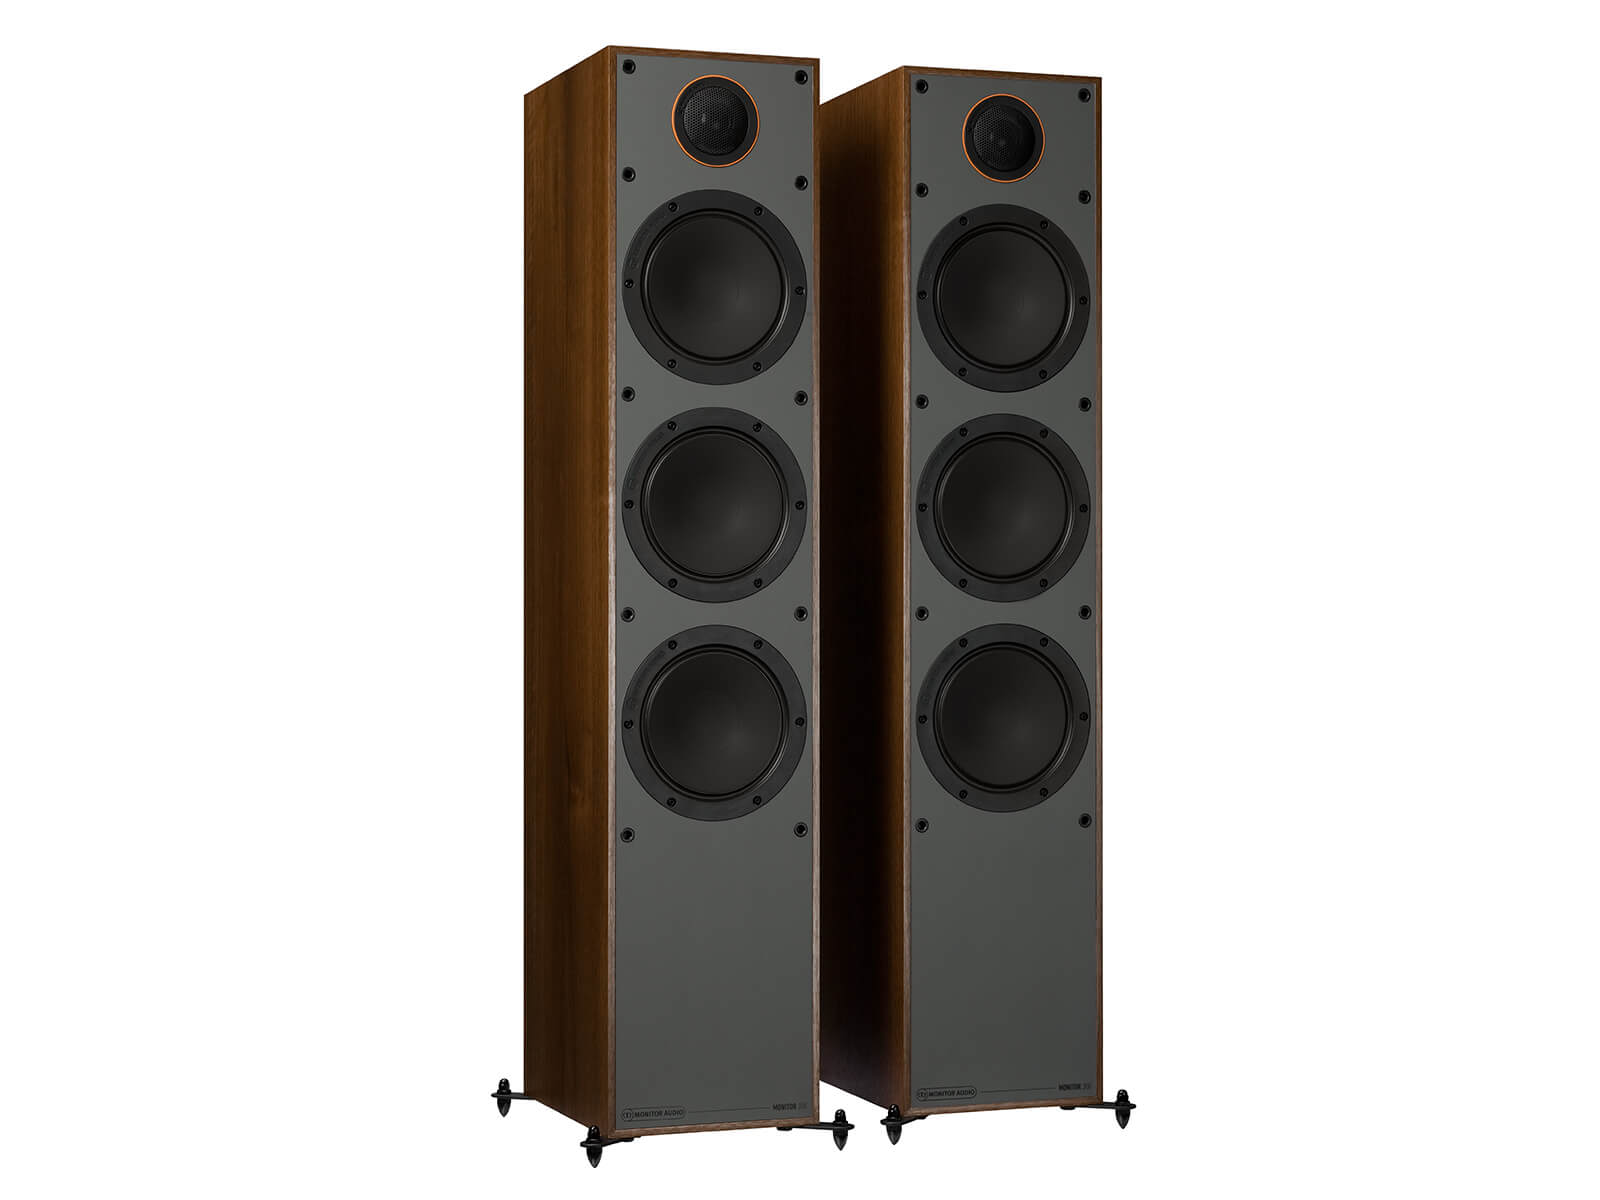 Monitor 300, floorstanding speakers, without grilles in a walnut vinyl finish.